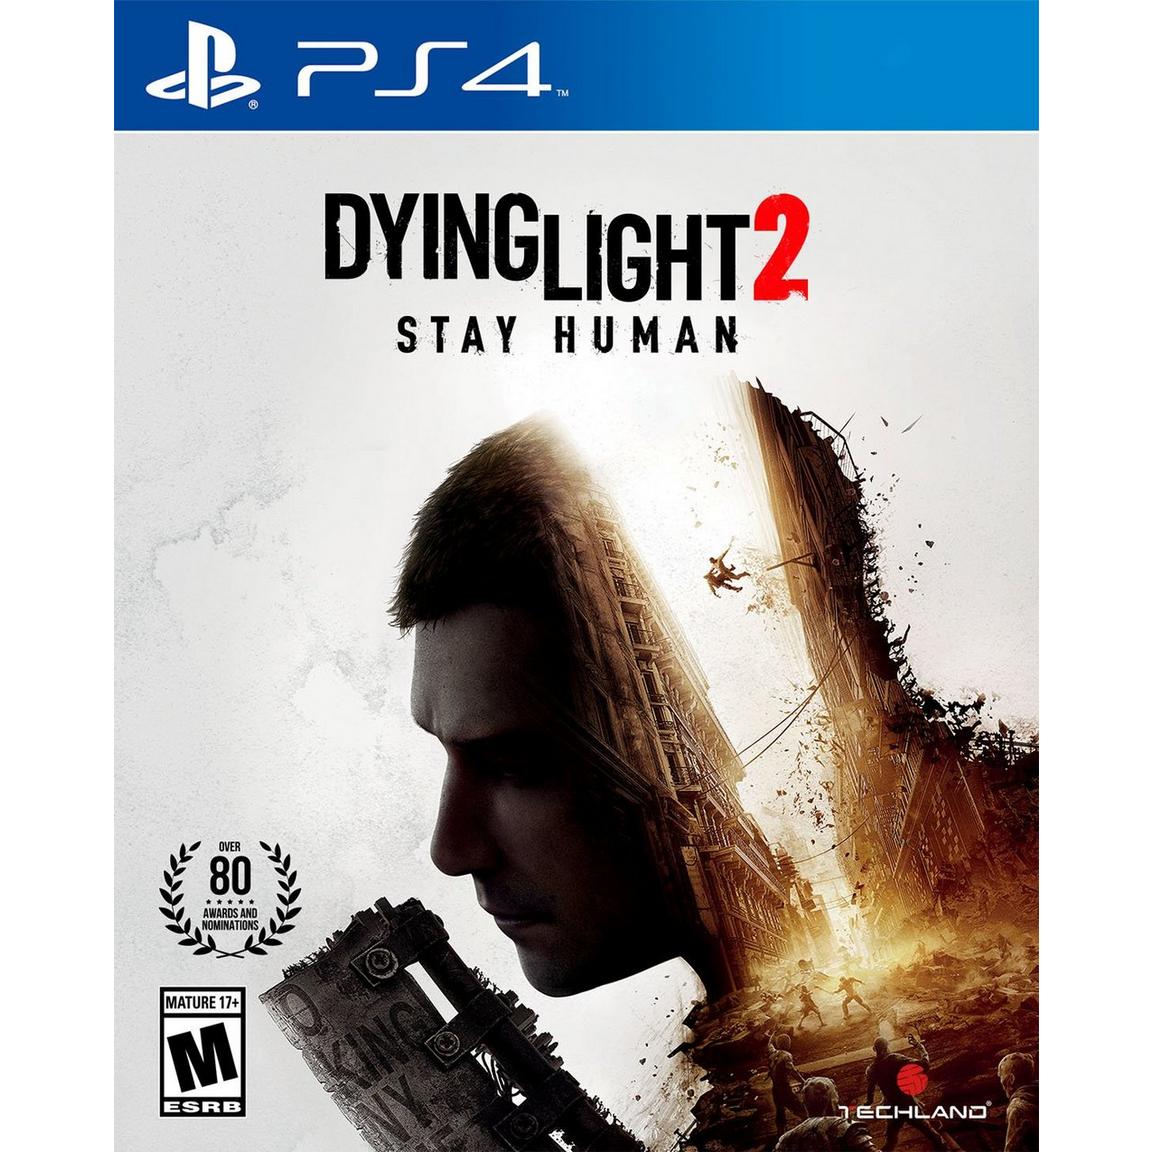 Dying Light 2 - PlayStation 4, Pre-Owned -  Square Enix, 662248924816